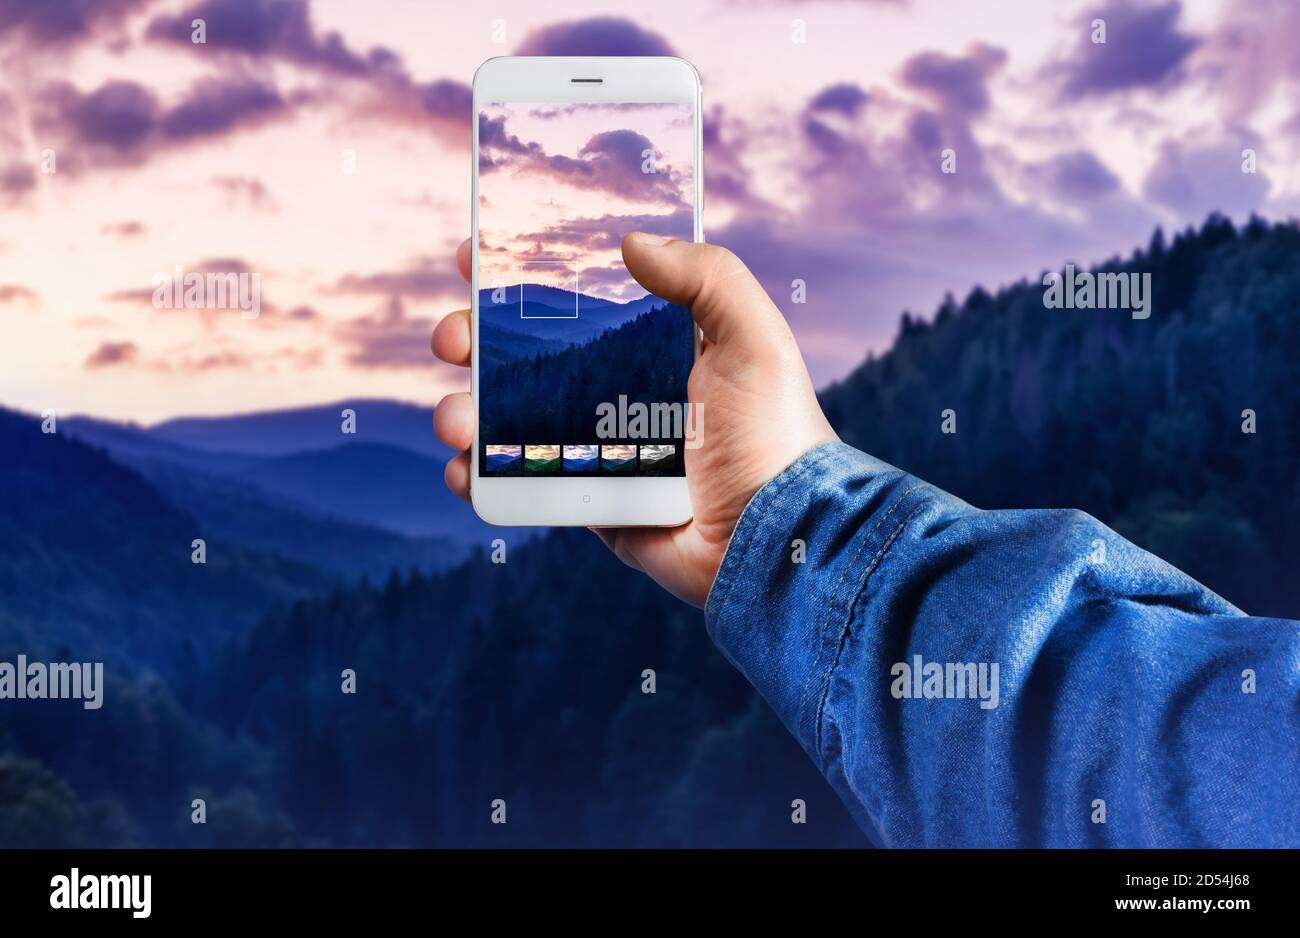 First person view photo of a male hand in jeans shirt holding smartphone and taking photo and using application in forest mountains. Stock Photo